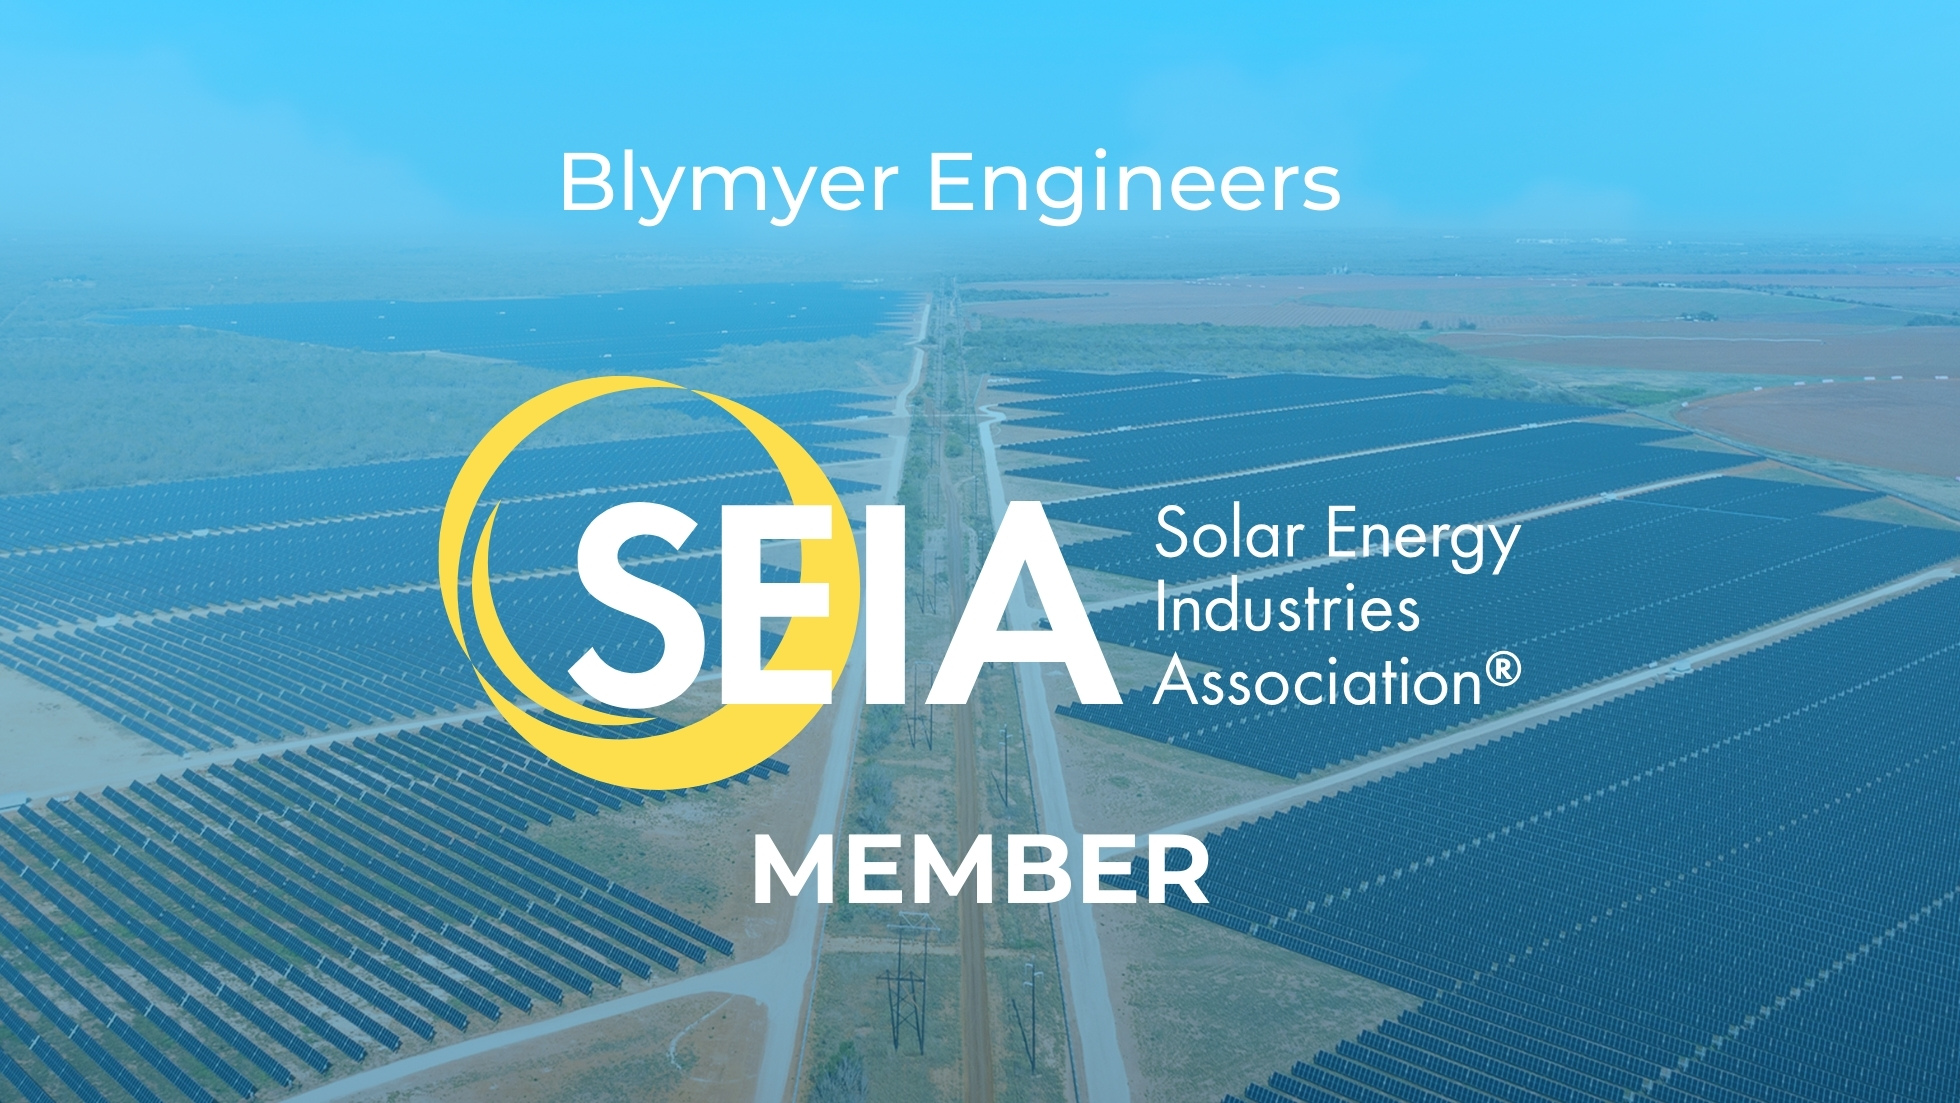 Large field of utility-scale solar panels with SEIA logo and Blymyer Engineers title